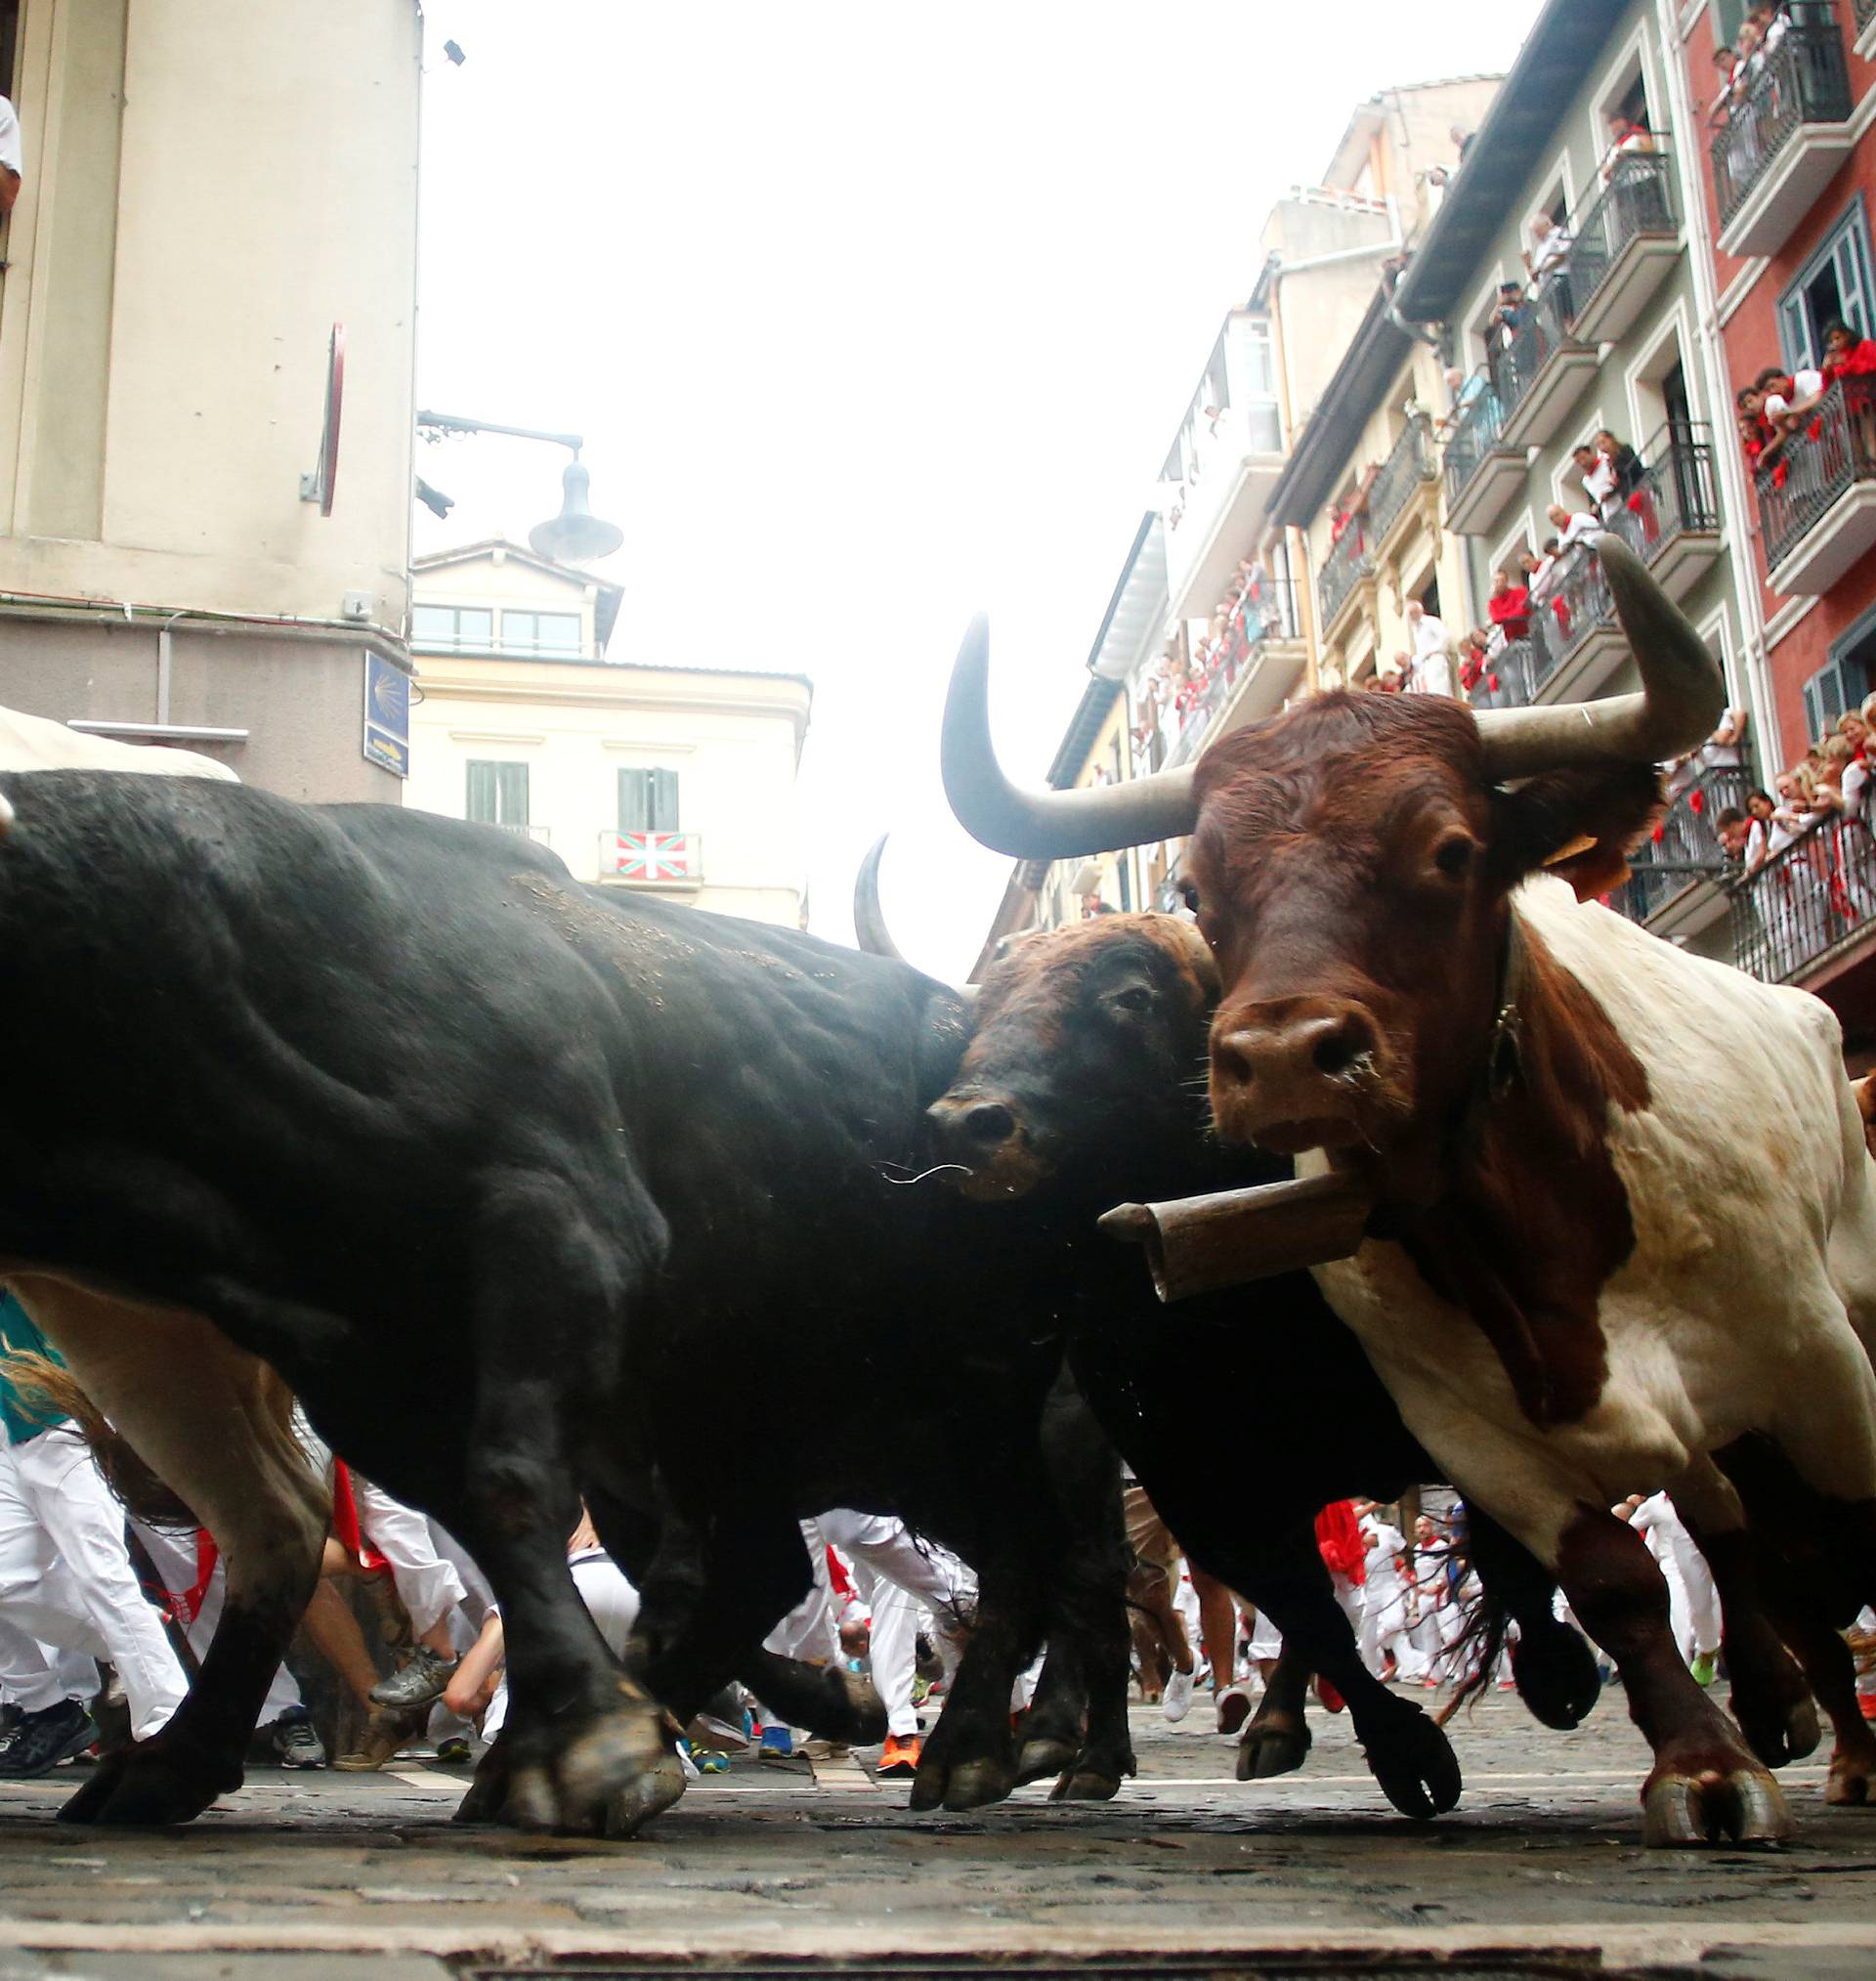 Runners sprint alongside Fuente Ymbro fighting bulls during the fourth running of the bulls at the San Fermin festival in Pamplona